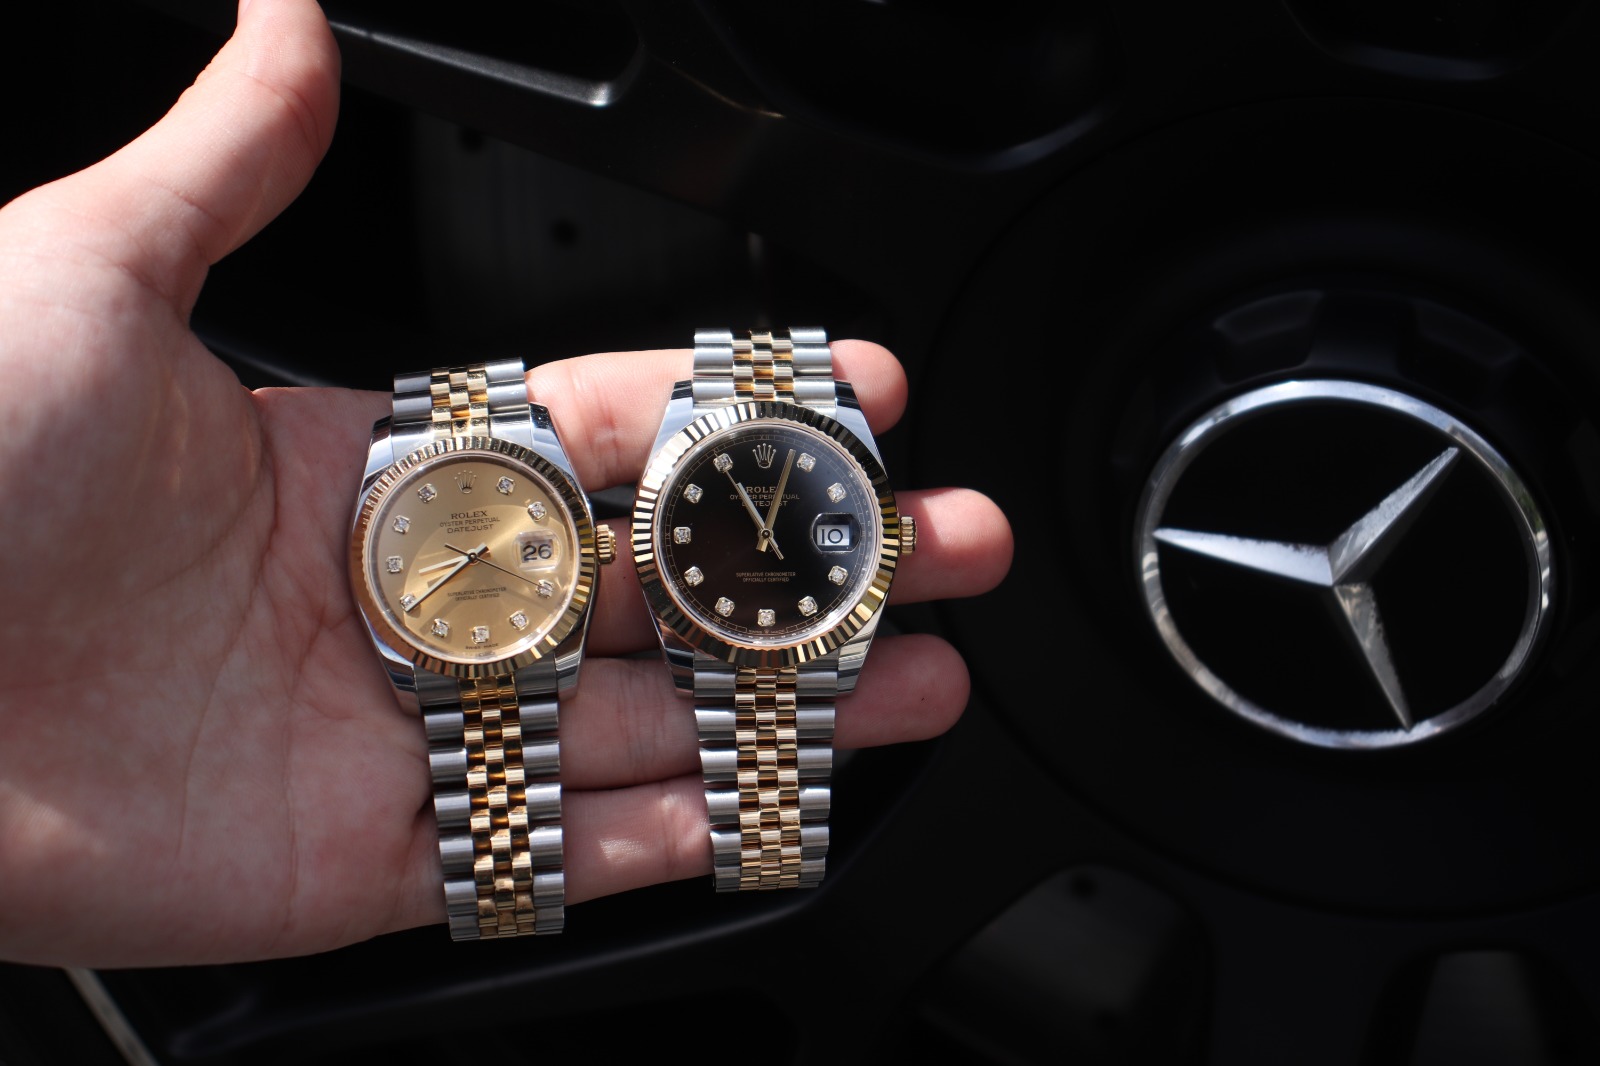 holding a rolex date just 116233 41mm vs 36mm black dial and gold dial